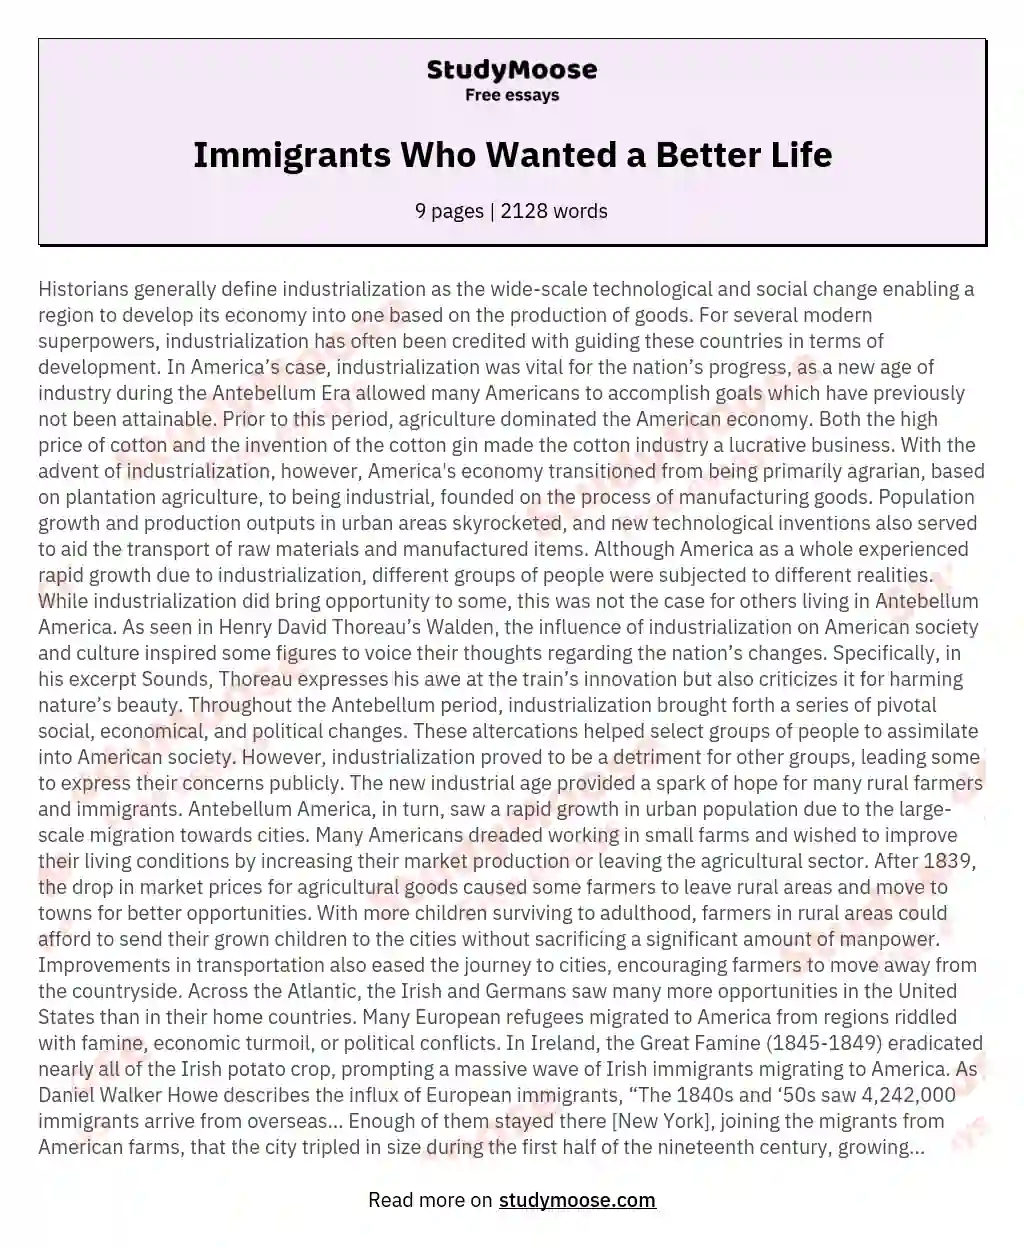 Immigrants Who Wanted a Better Life essay